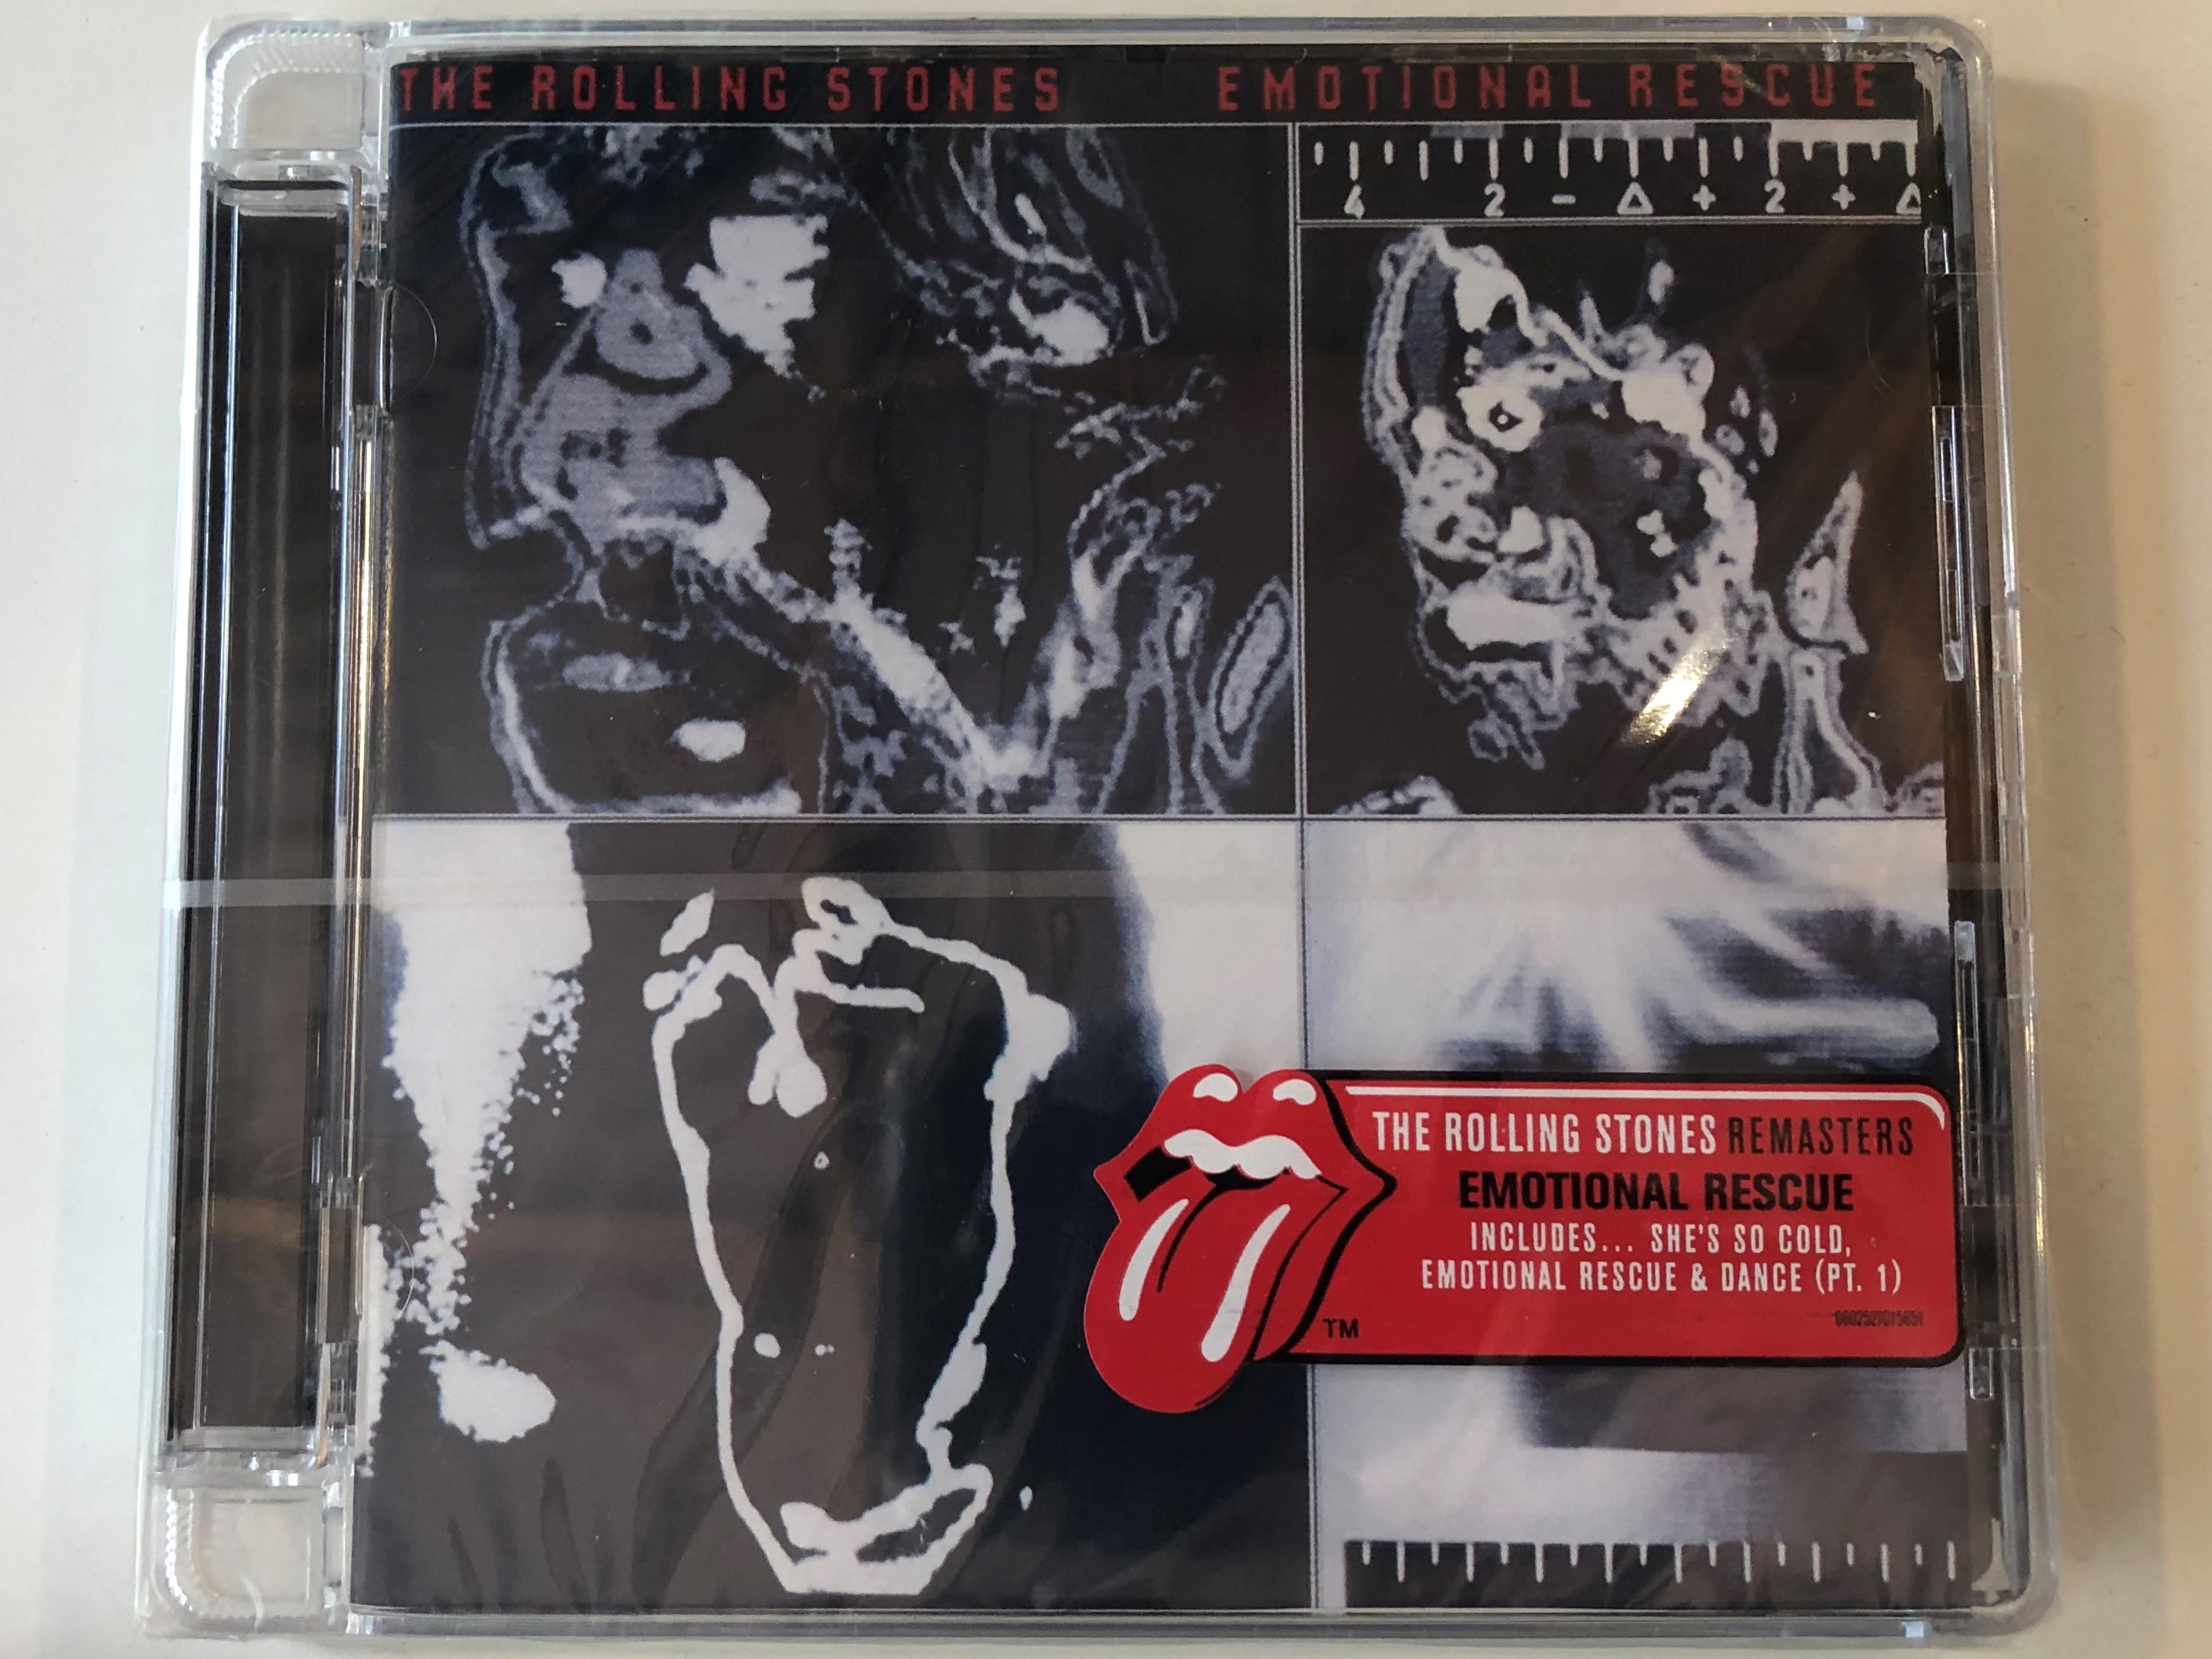 the-rolling-stones-emotional-rescue-includes...-she-s-so-cold-emotional-rescue-dance-pt.-1-polydor-audio-cd-2009-0602527015651-1-.jpg